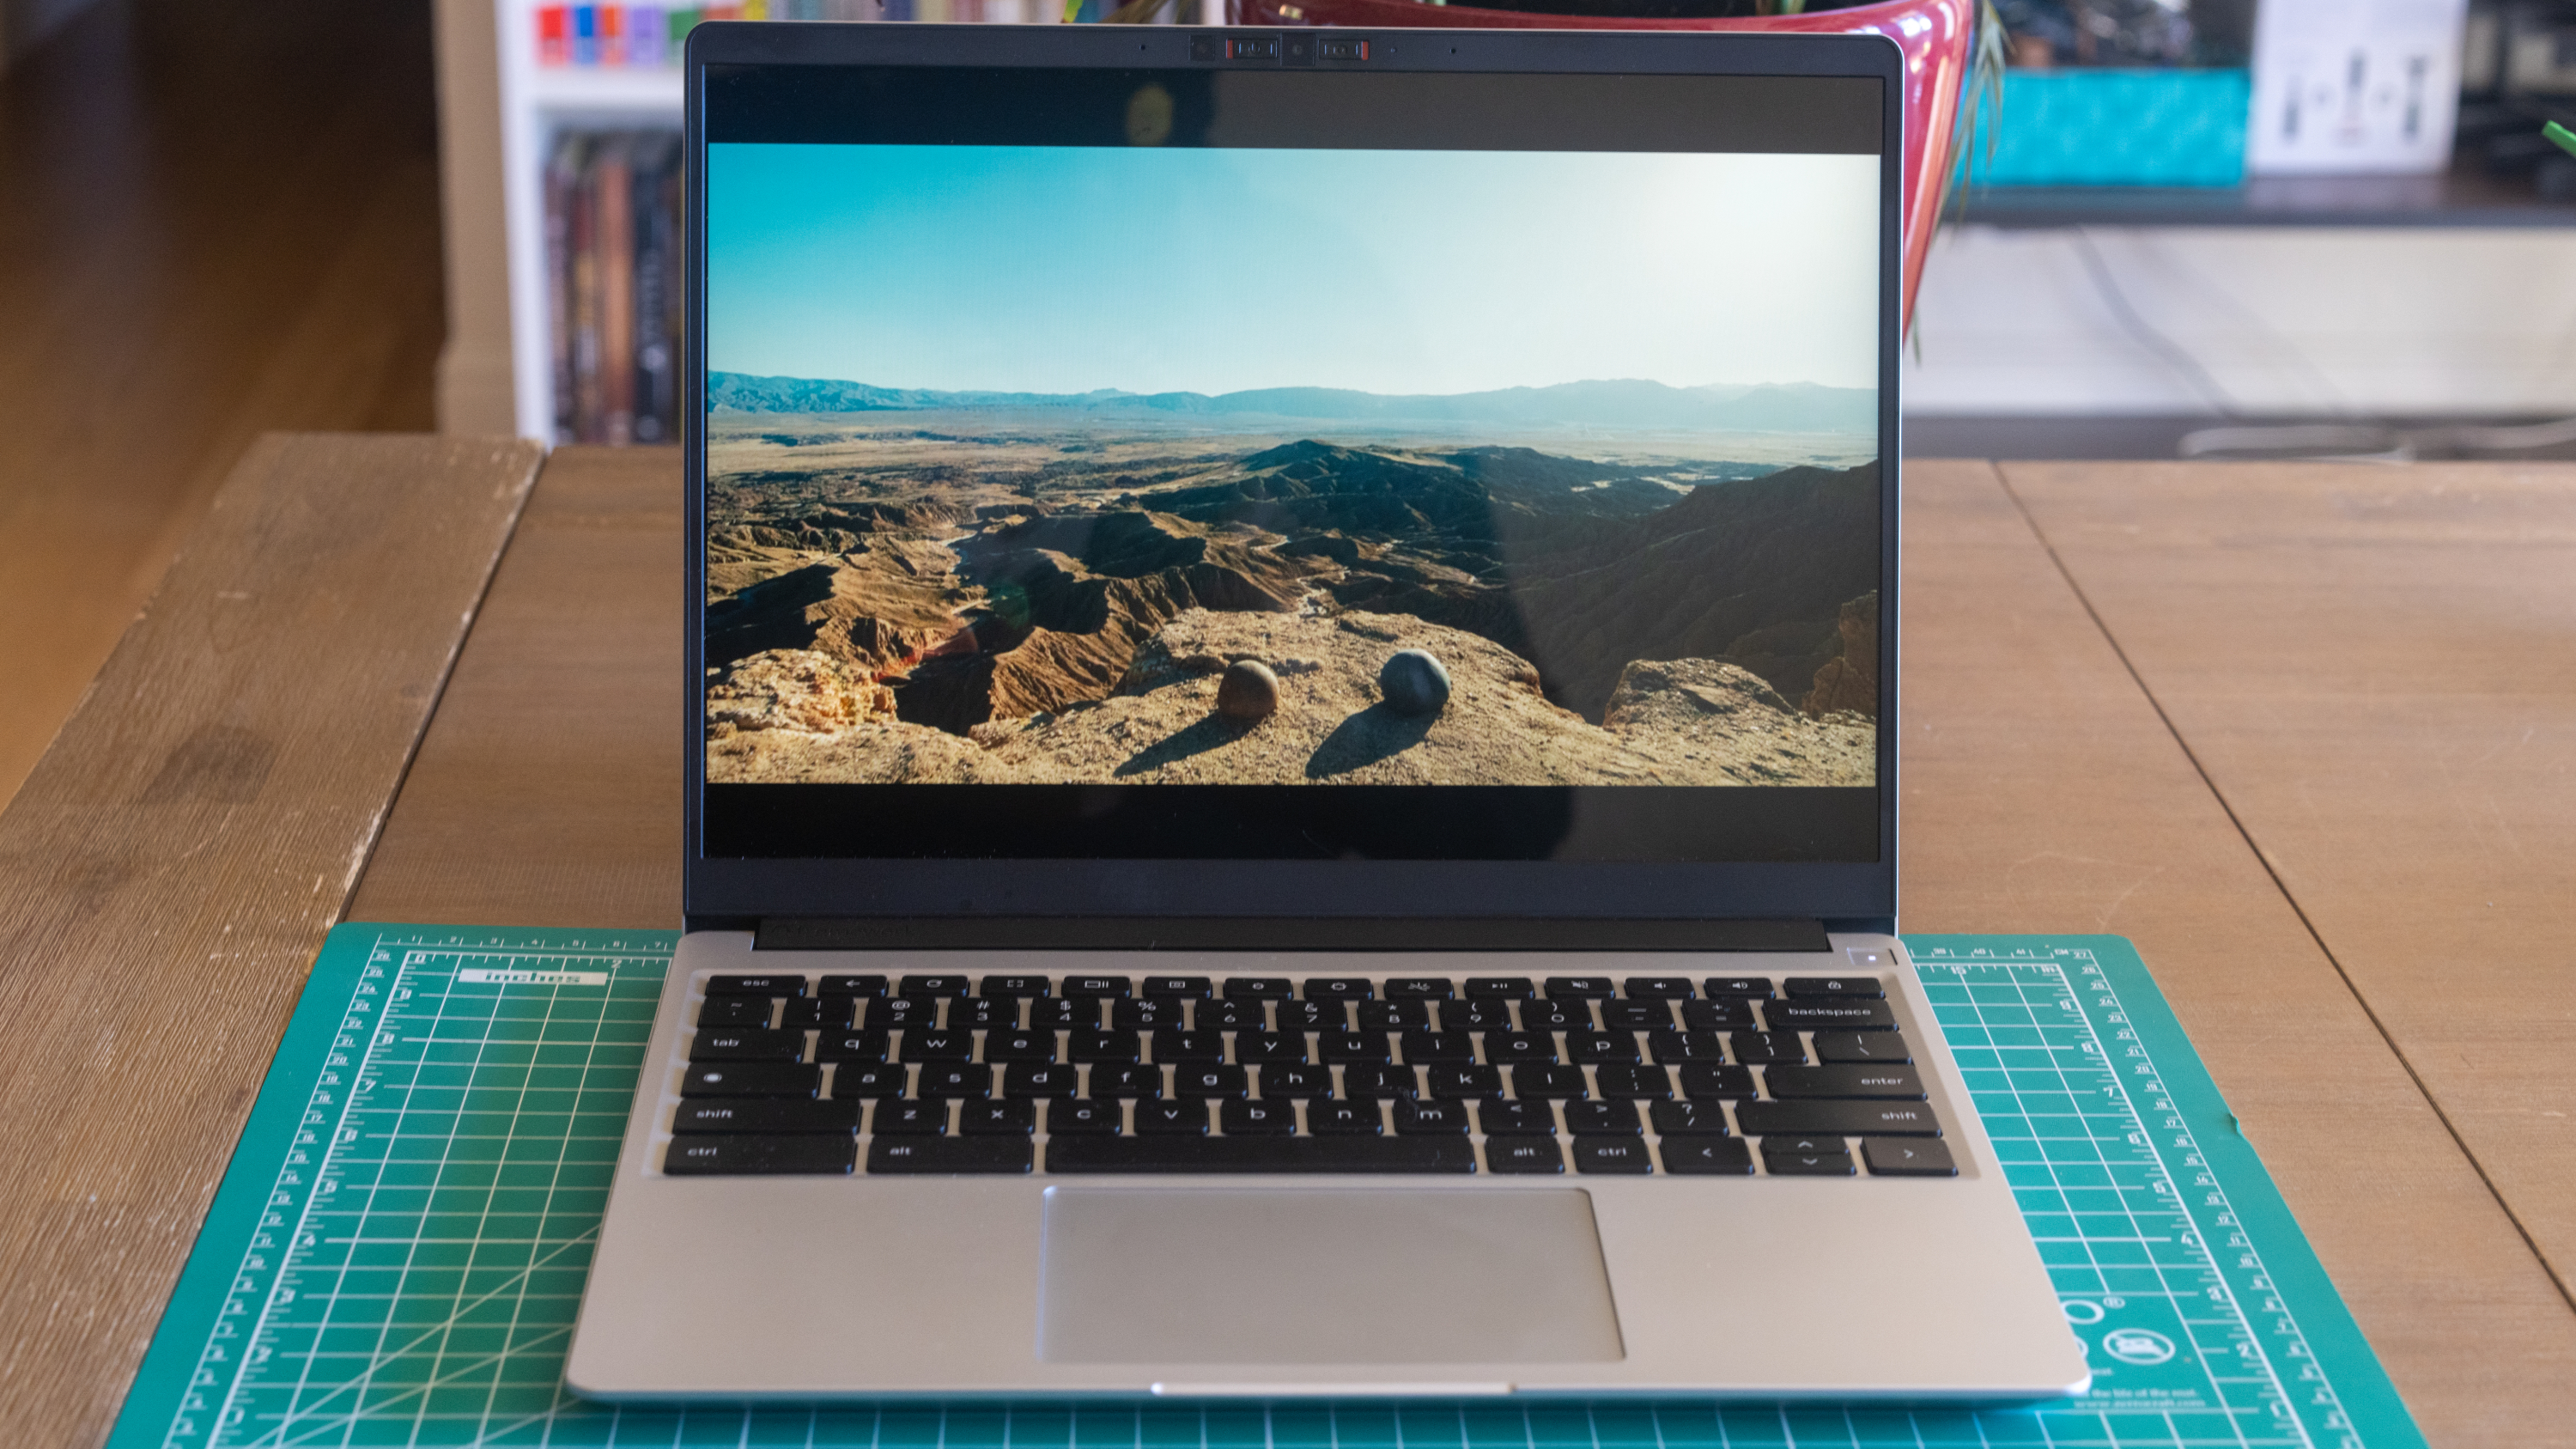 Google Chromebook Pixel (2015) review: Once a worthy Windows alternative,  now replaced with the Pixelbook